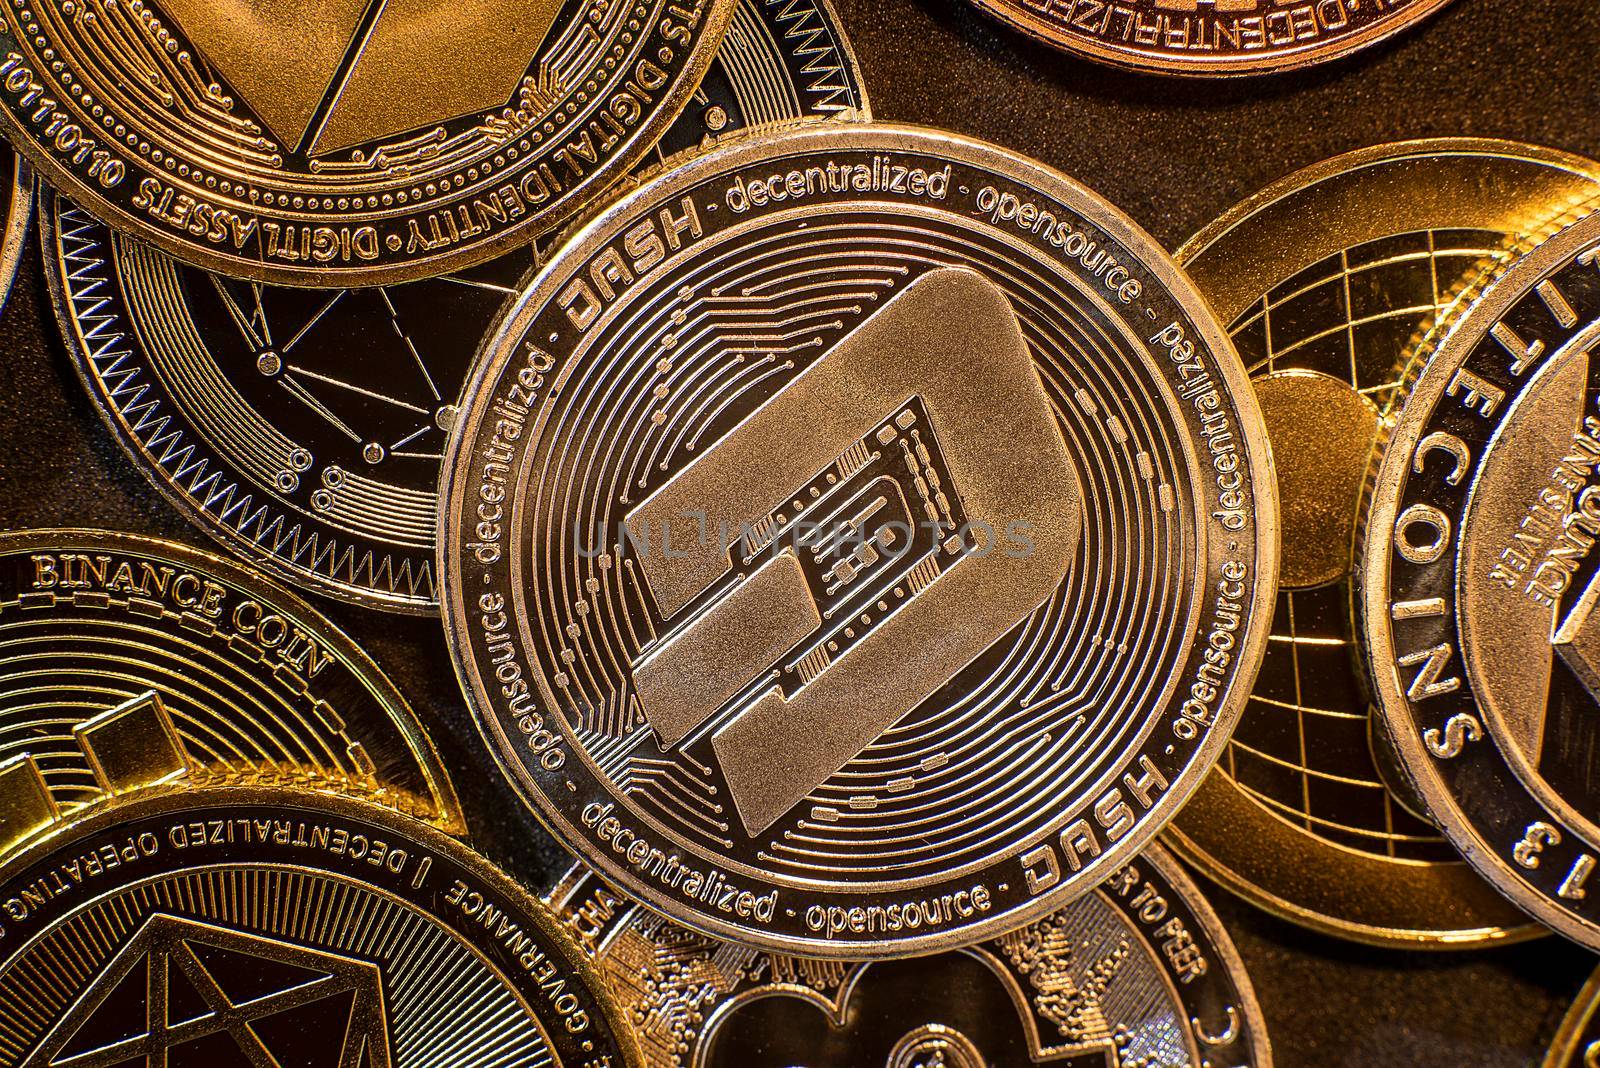 Horizontal view of cryptocurrency tokens, including Dash, Bitcoin, dogecoin, and Ethereum seen from above on a black background. High quality photo